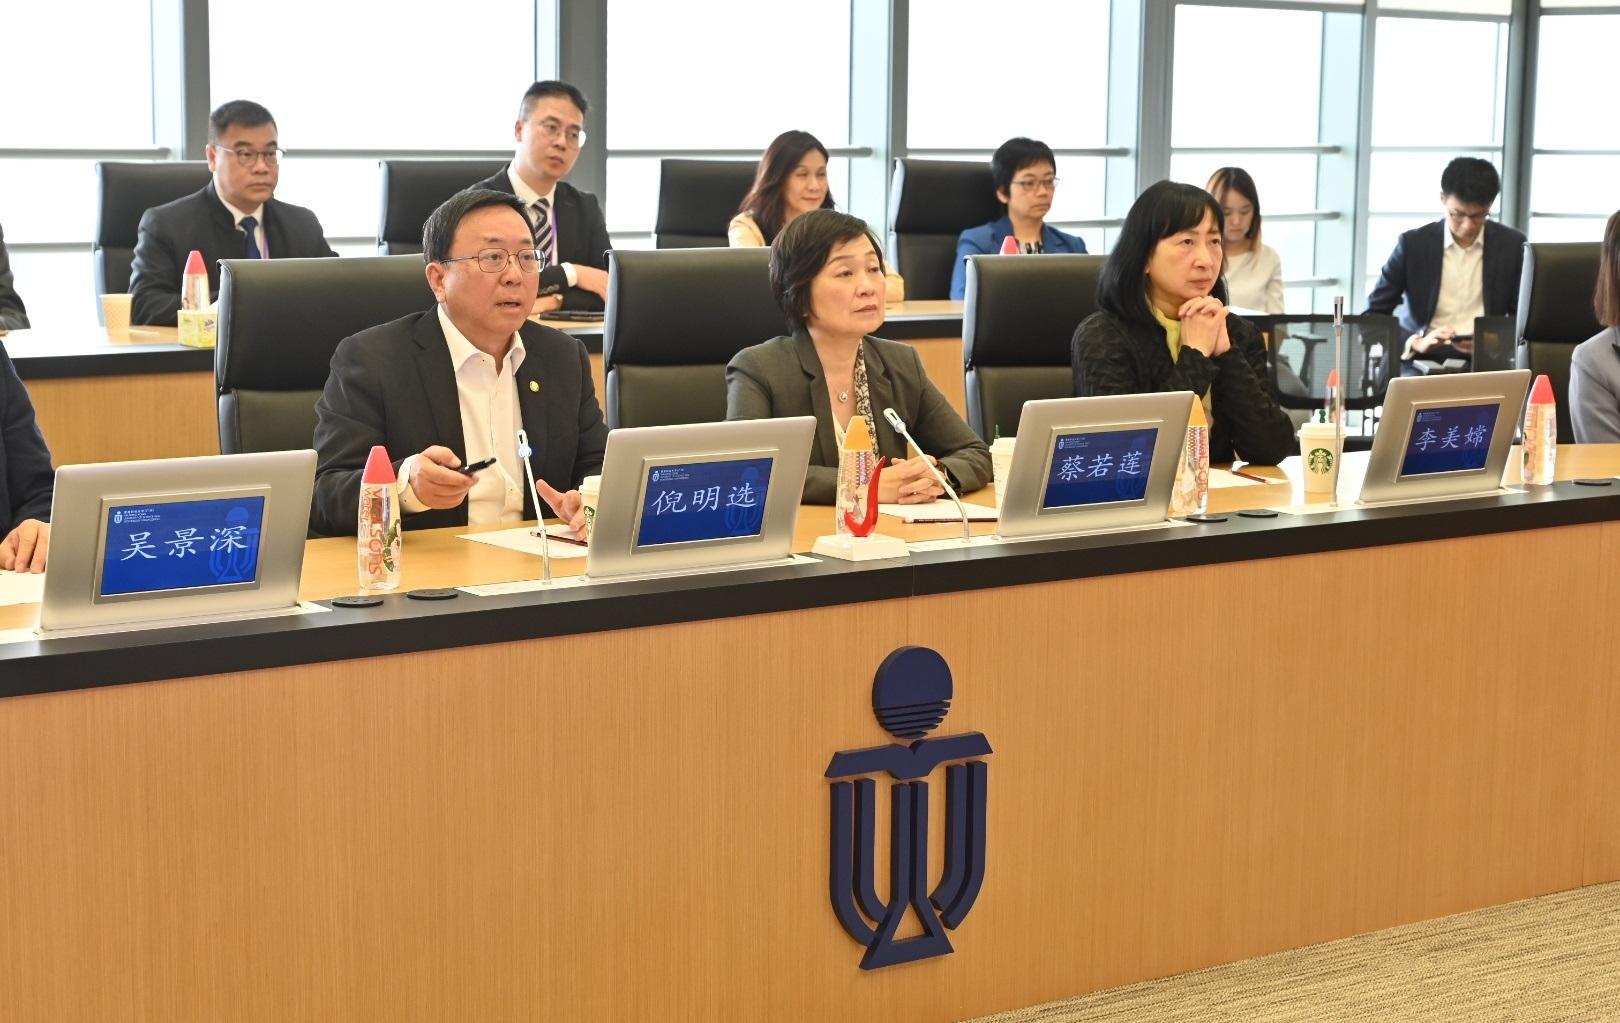 The Secretary for Education, Dr Choi Yuk-lin, continued to lead a delegation to visit Nansha, Guangzhou, and visited the Hong Kong University of Science and Technology (Guangzhou) (HKUST(GZ)) today (March 10). Photo shows Dr Choi (front row, centre) and the Permanent Secretary for Education, Ms Michelle Li (front row, right), attending a thematic seminar and listening to a presentation by the President of HKUST(GZ), Professor Lionel Ni Ming-shuan (front row, left), to learn more about the development opportunities in Nansha and major Guangzhou-Hong Kong co-operative projects, with HKUST(GZ) as an example.